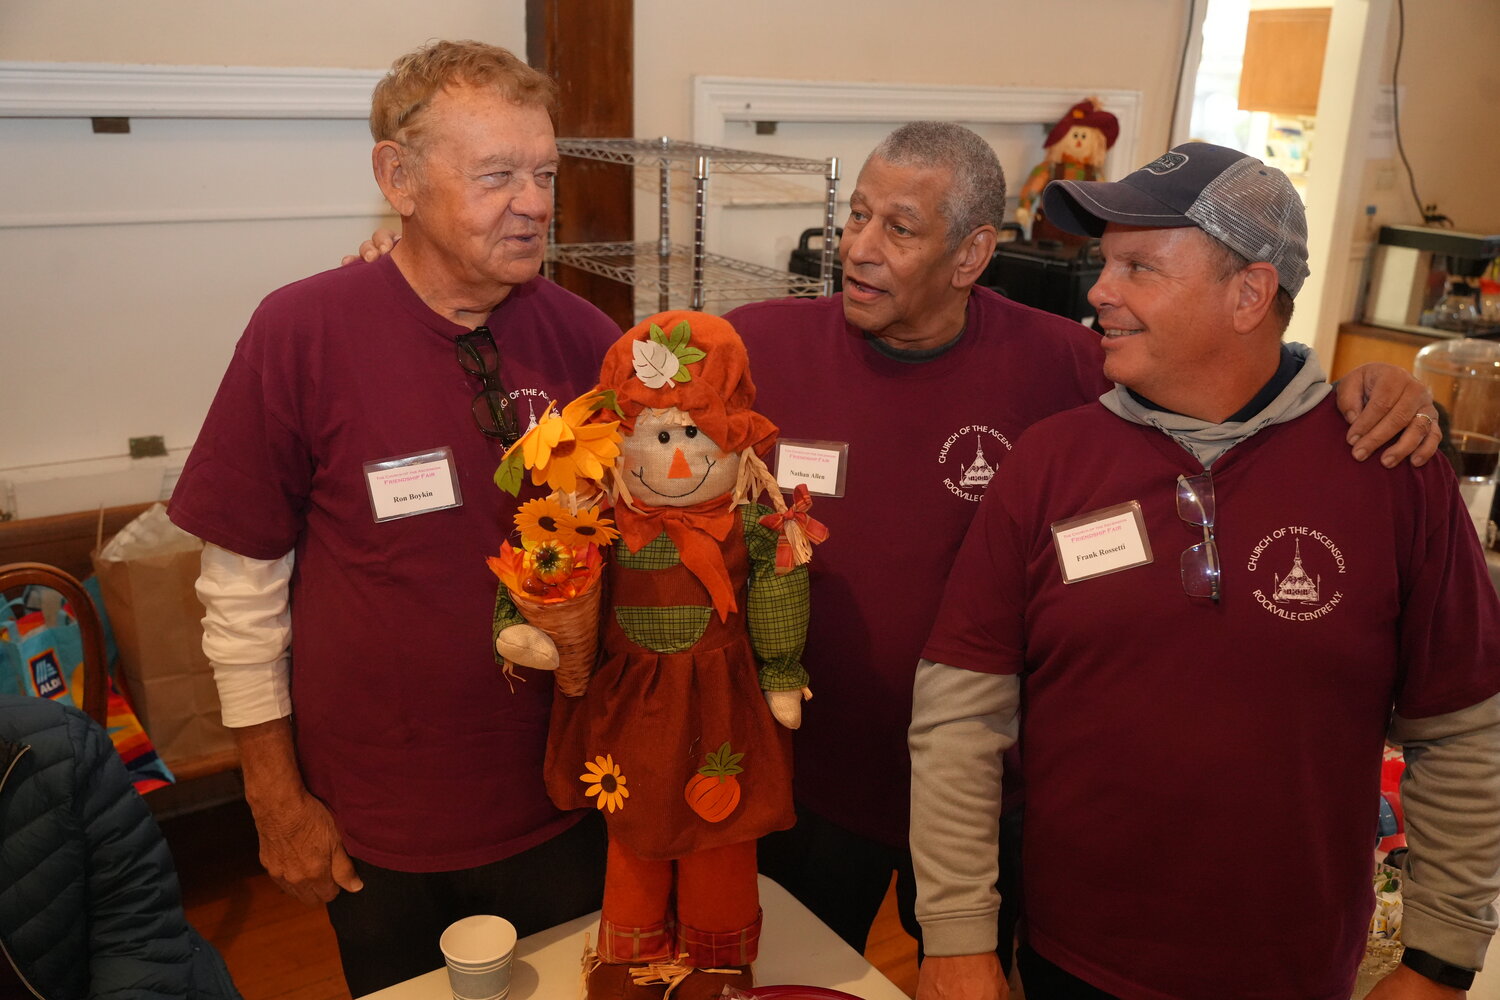 Ron Boykin, left, Nathan Allen and Frank Rossetti help organize the two-day event at the Church of the Ascension in Rockville Centre.